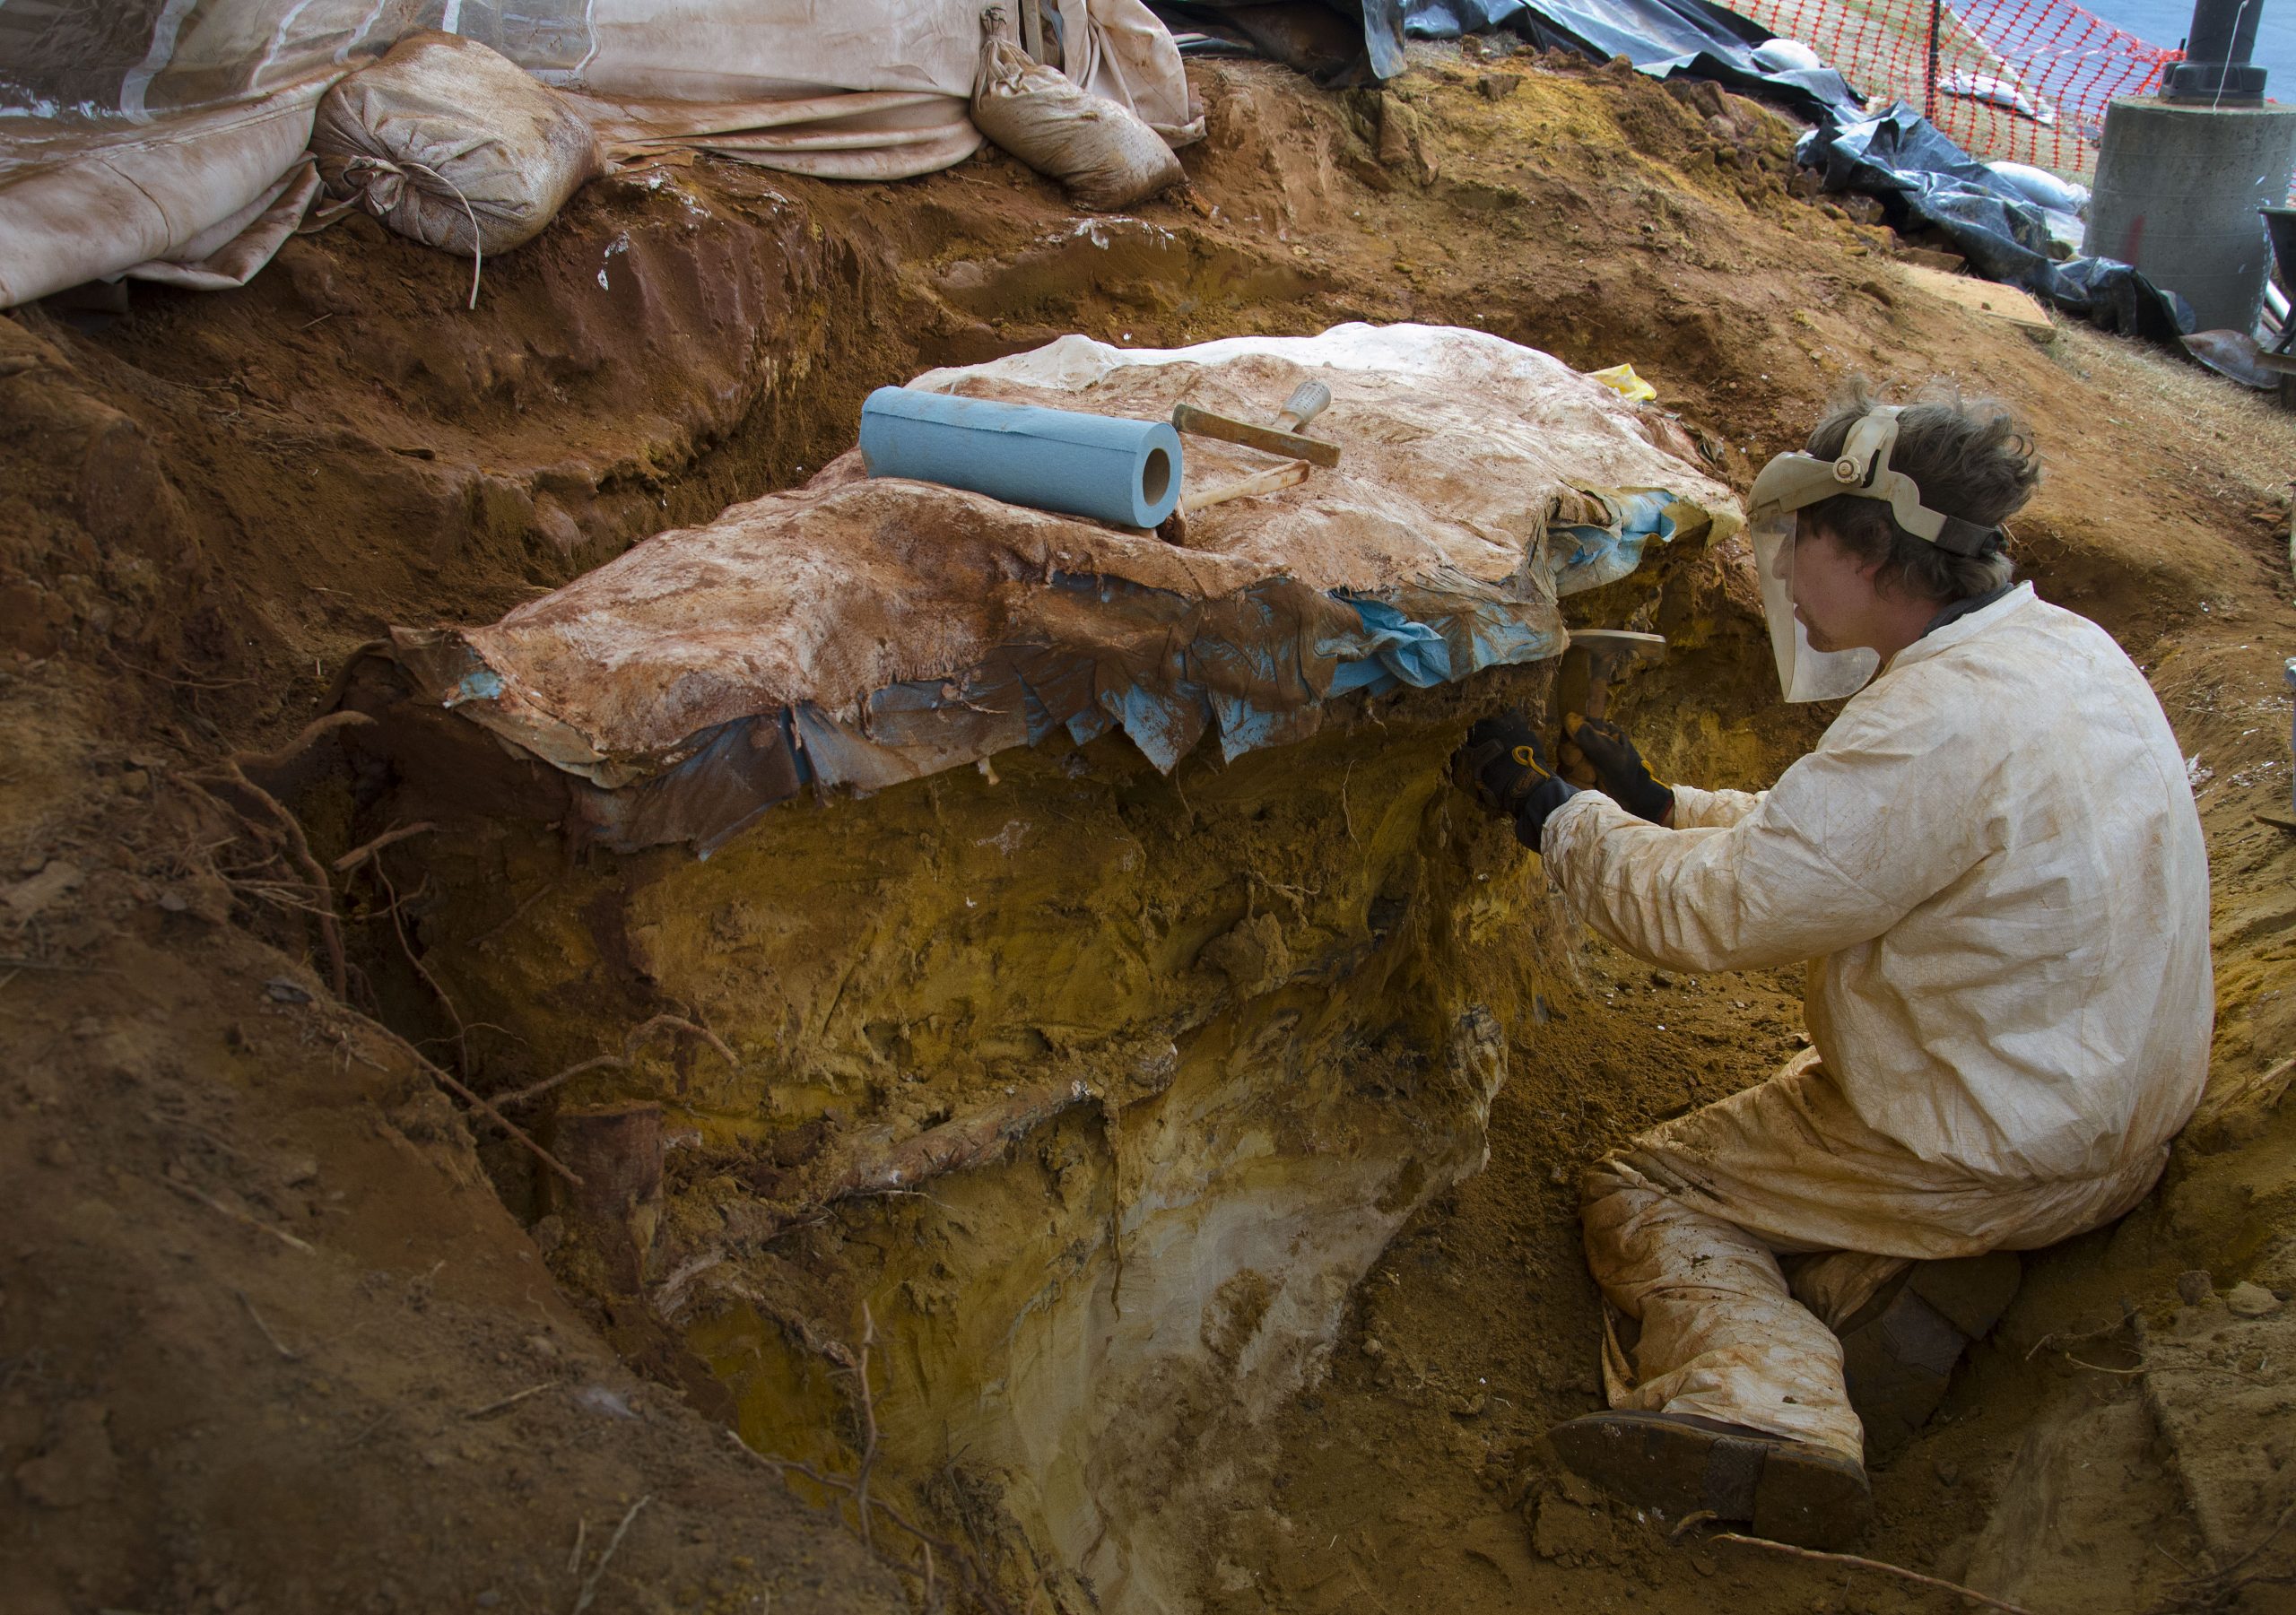 A paleontologist digs a trench and puts a plaster field jacket on large fossils